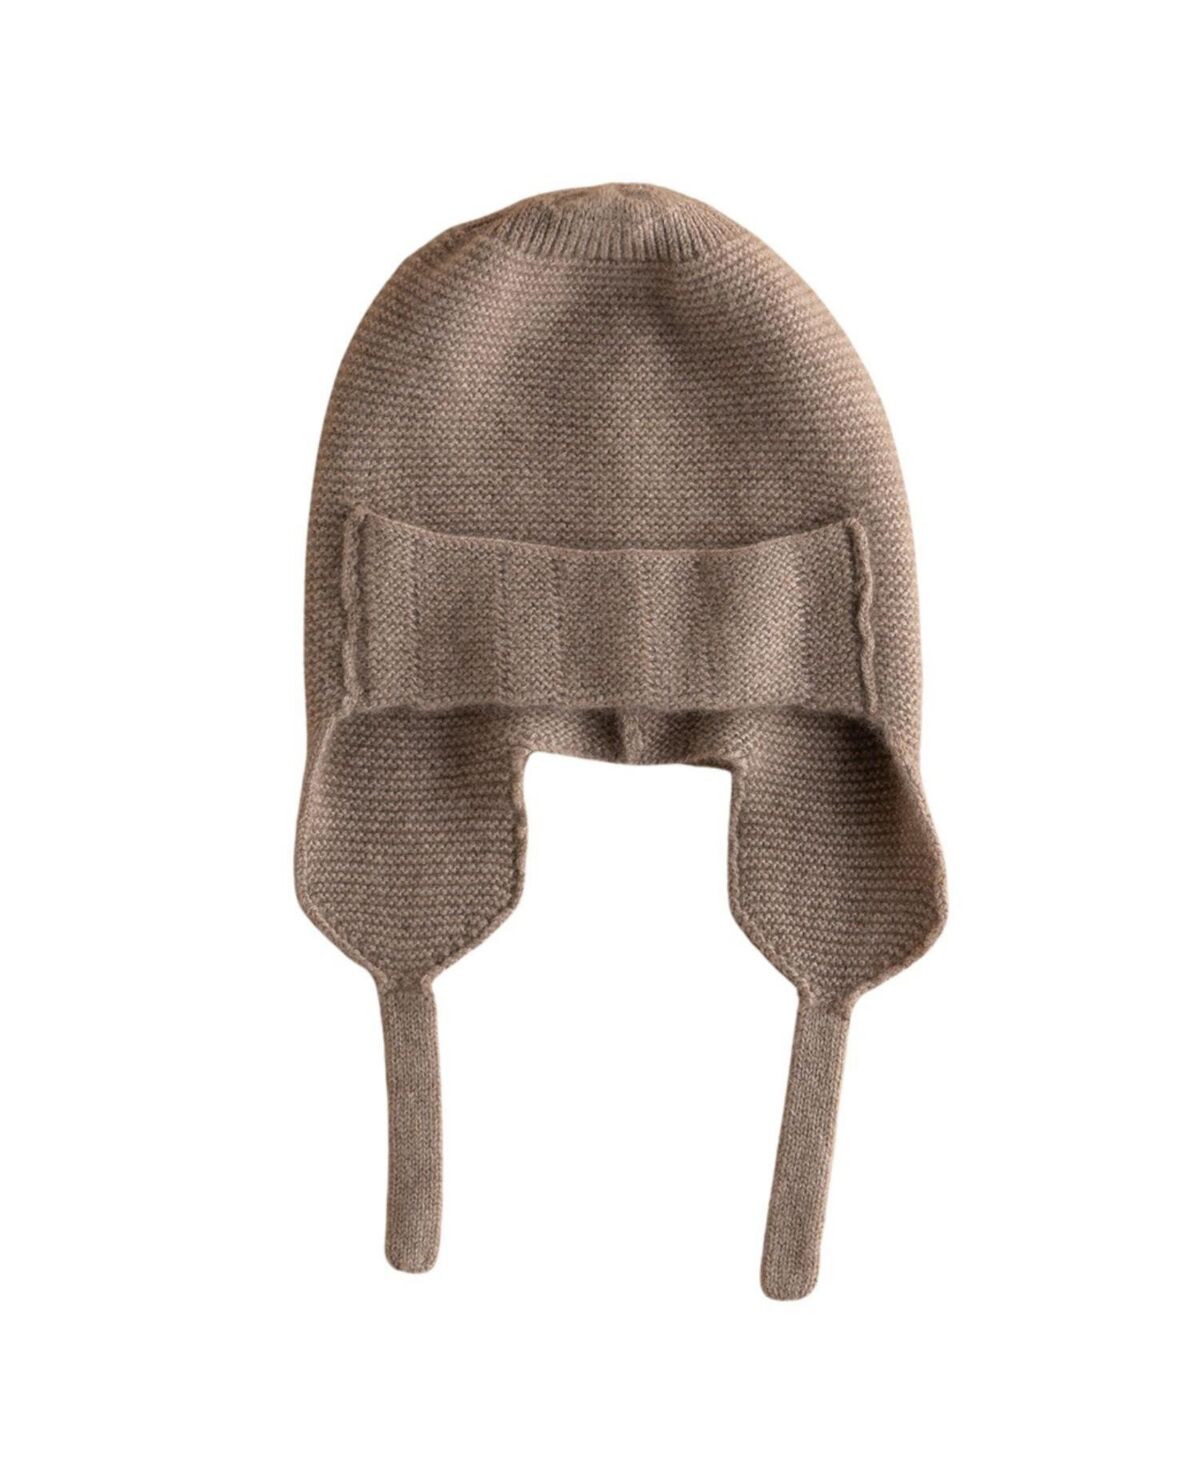 Bellemere New York Bellemere Cashmere Earflap Beanie - Brown